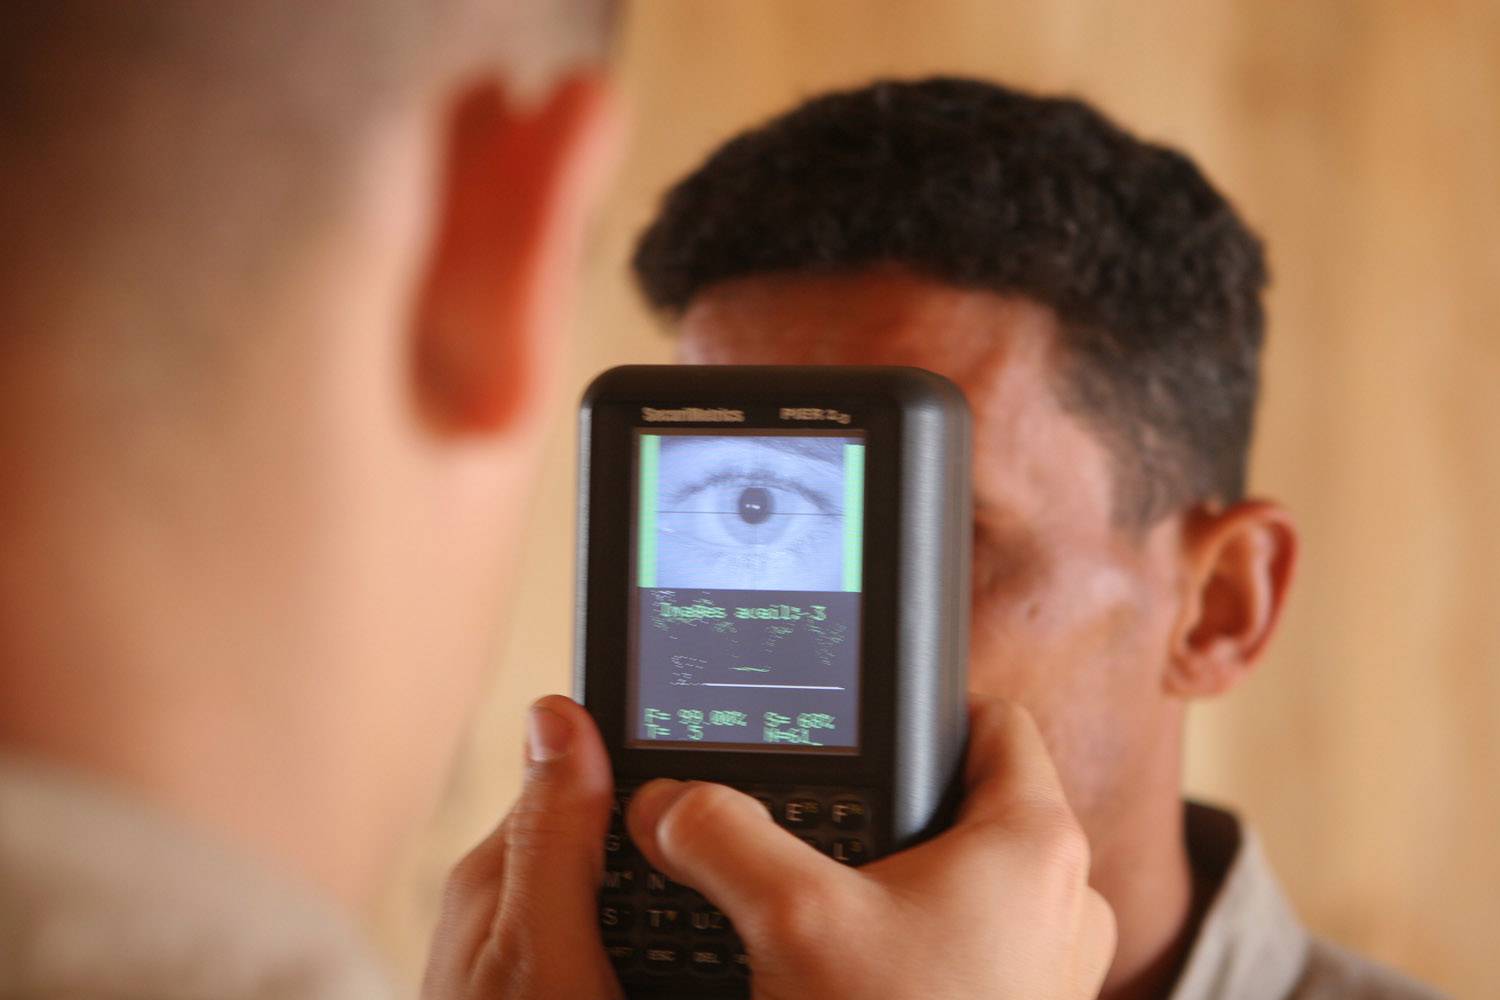 On 28 March 2006, An Iraqi recruit gets processed through the Biometric Automated Tool Set System before leaving for boot camp at the Recuiting Station, Fallujah, Iraq. Cpl Spencer M. Murphy, USMC via Flickr